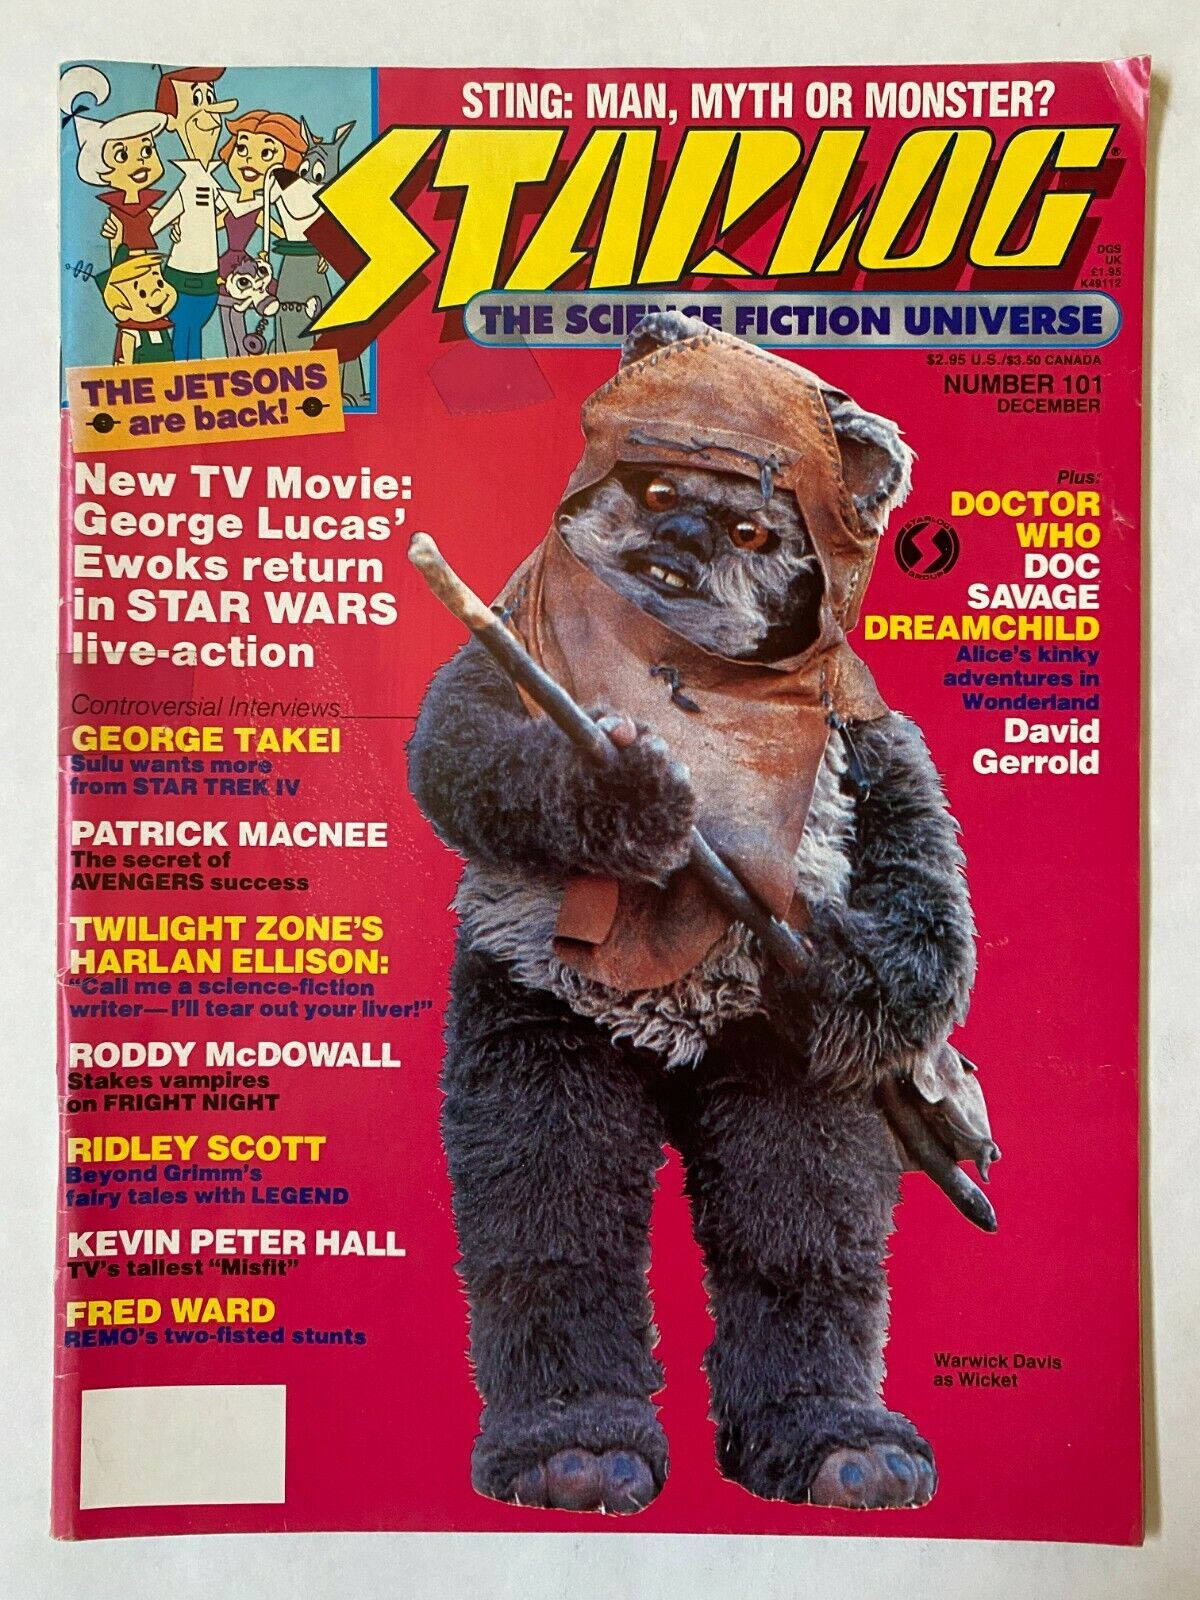 STARLOG #101 - 1985 November Featuring Star Wars On Cover VINTAGE